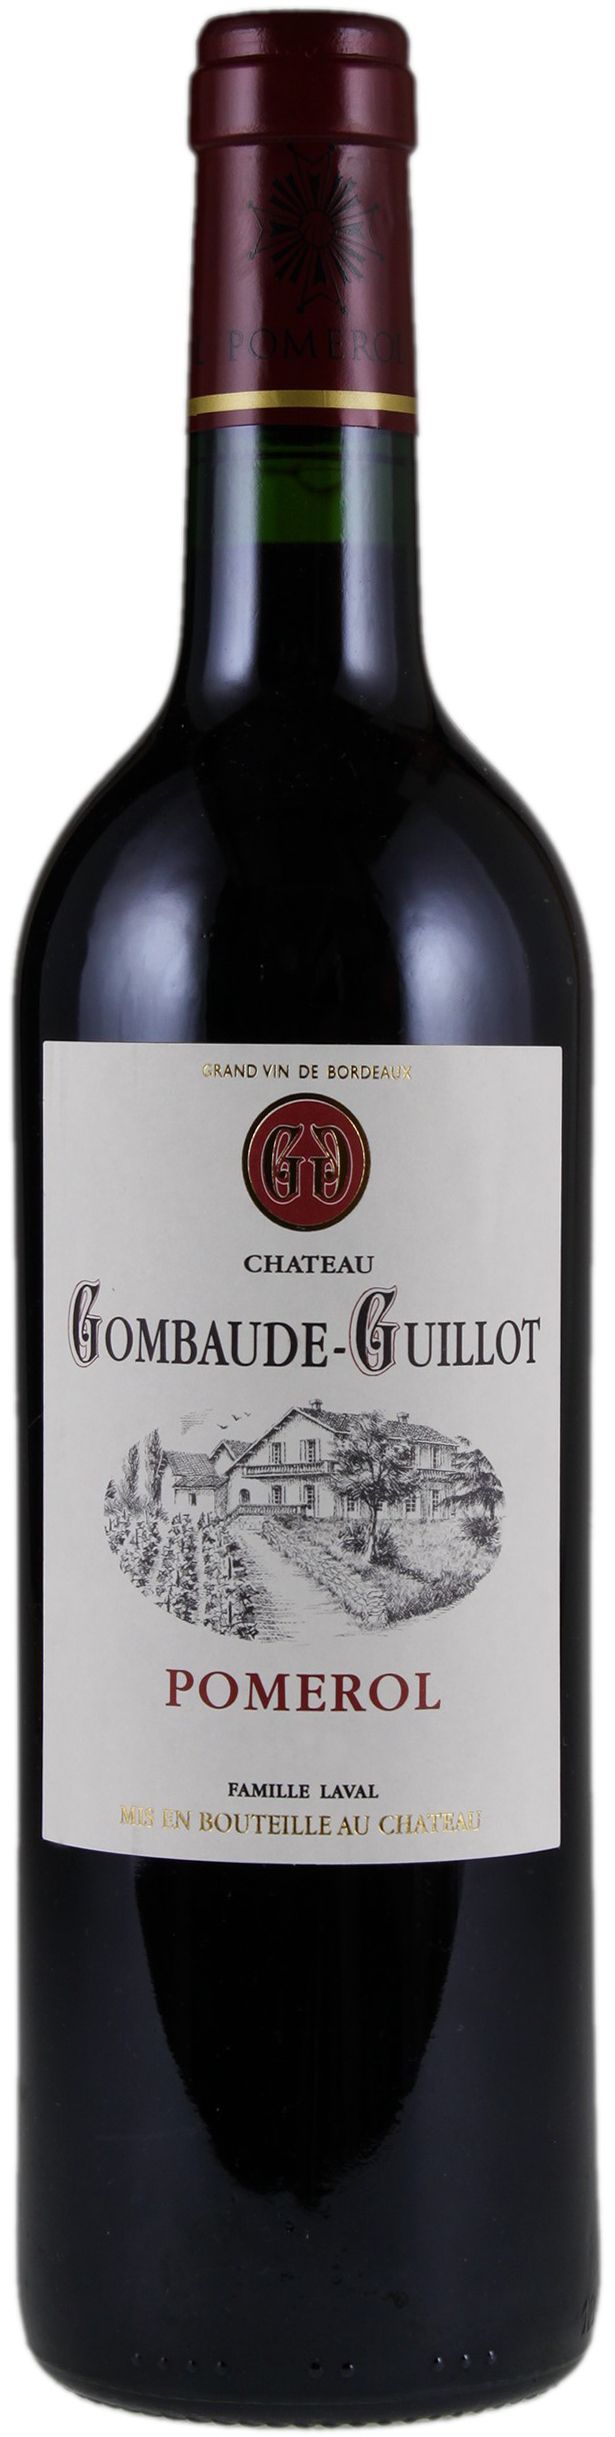 Chateau Gombaude Guillot, 2011